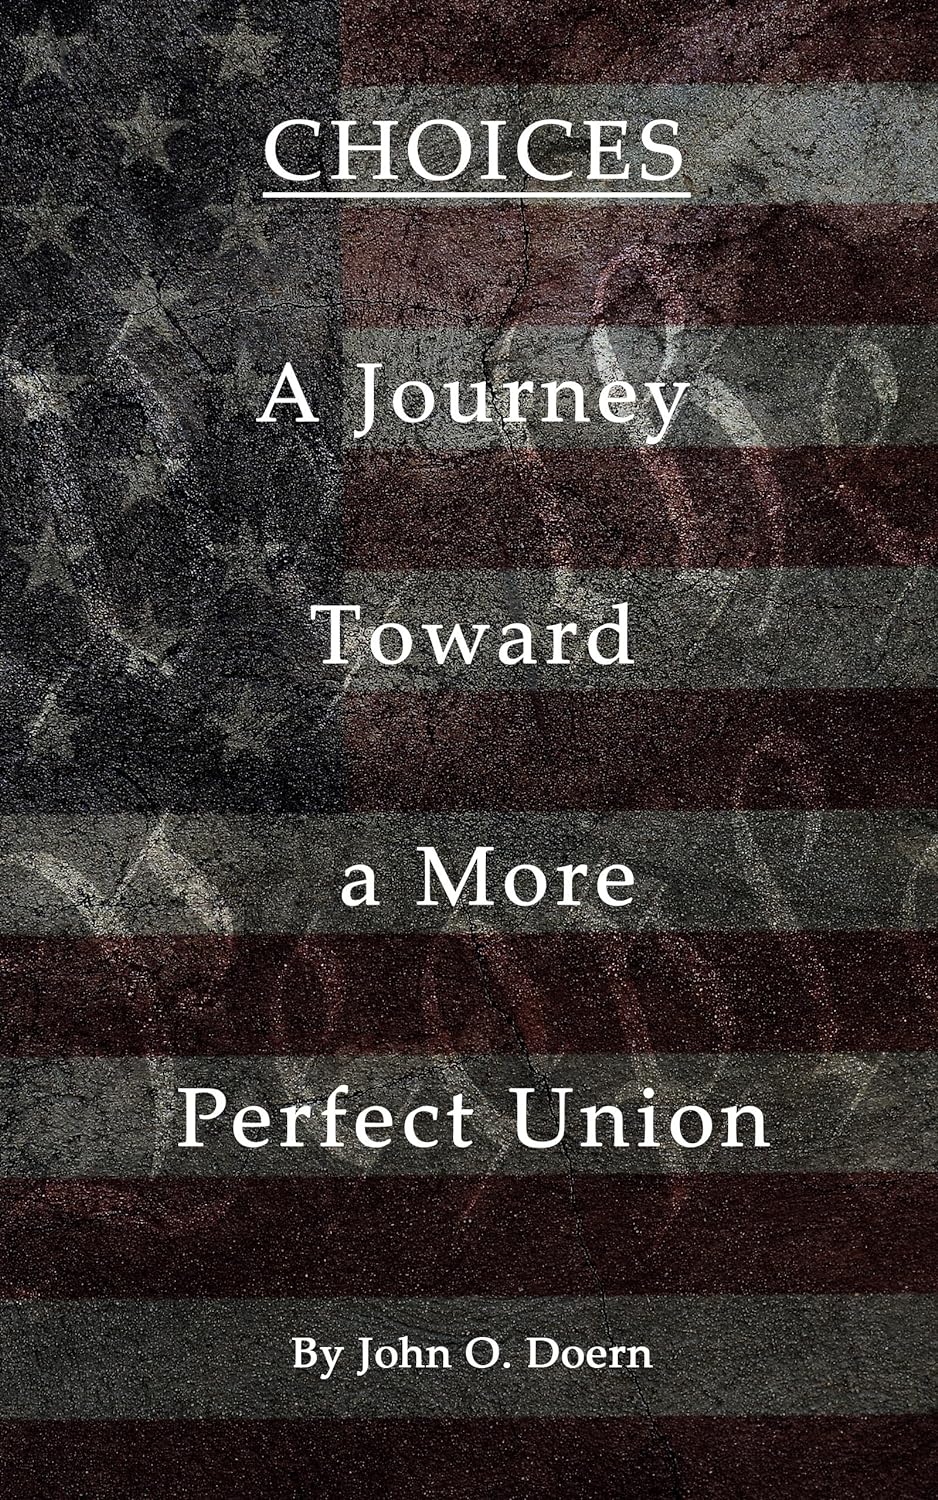 New book "Choices: A Journey Toward a More Perfect Union" by John Doern is released, an eye-opening examination of America’s two-party system and the need for additional voting options